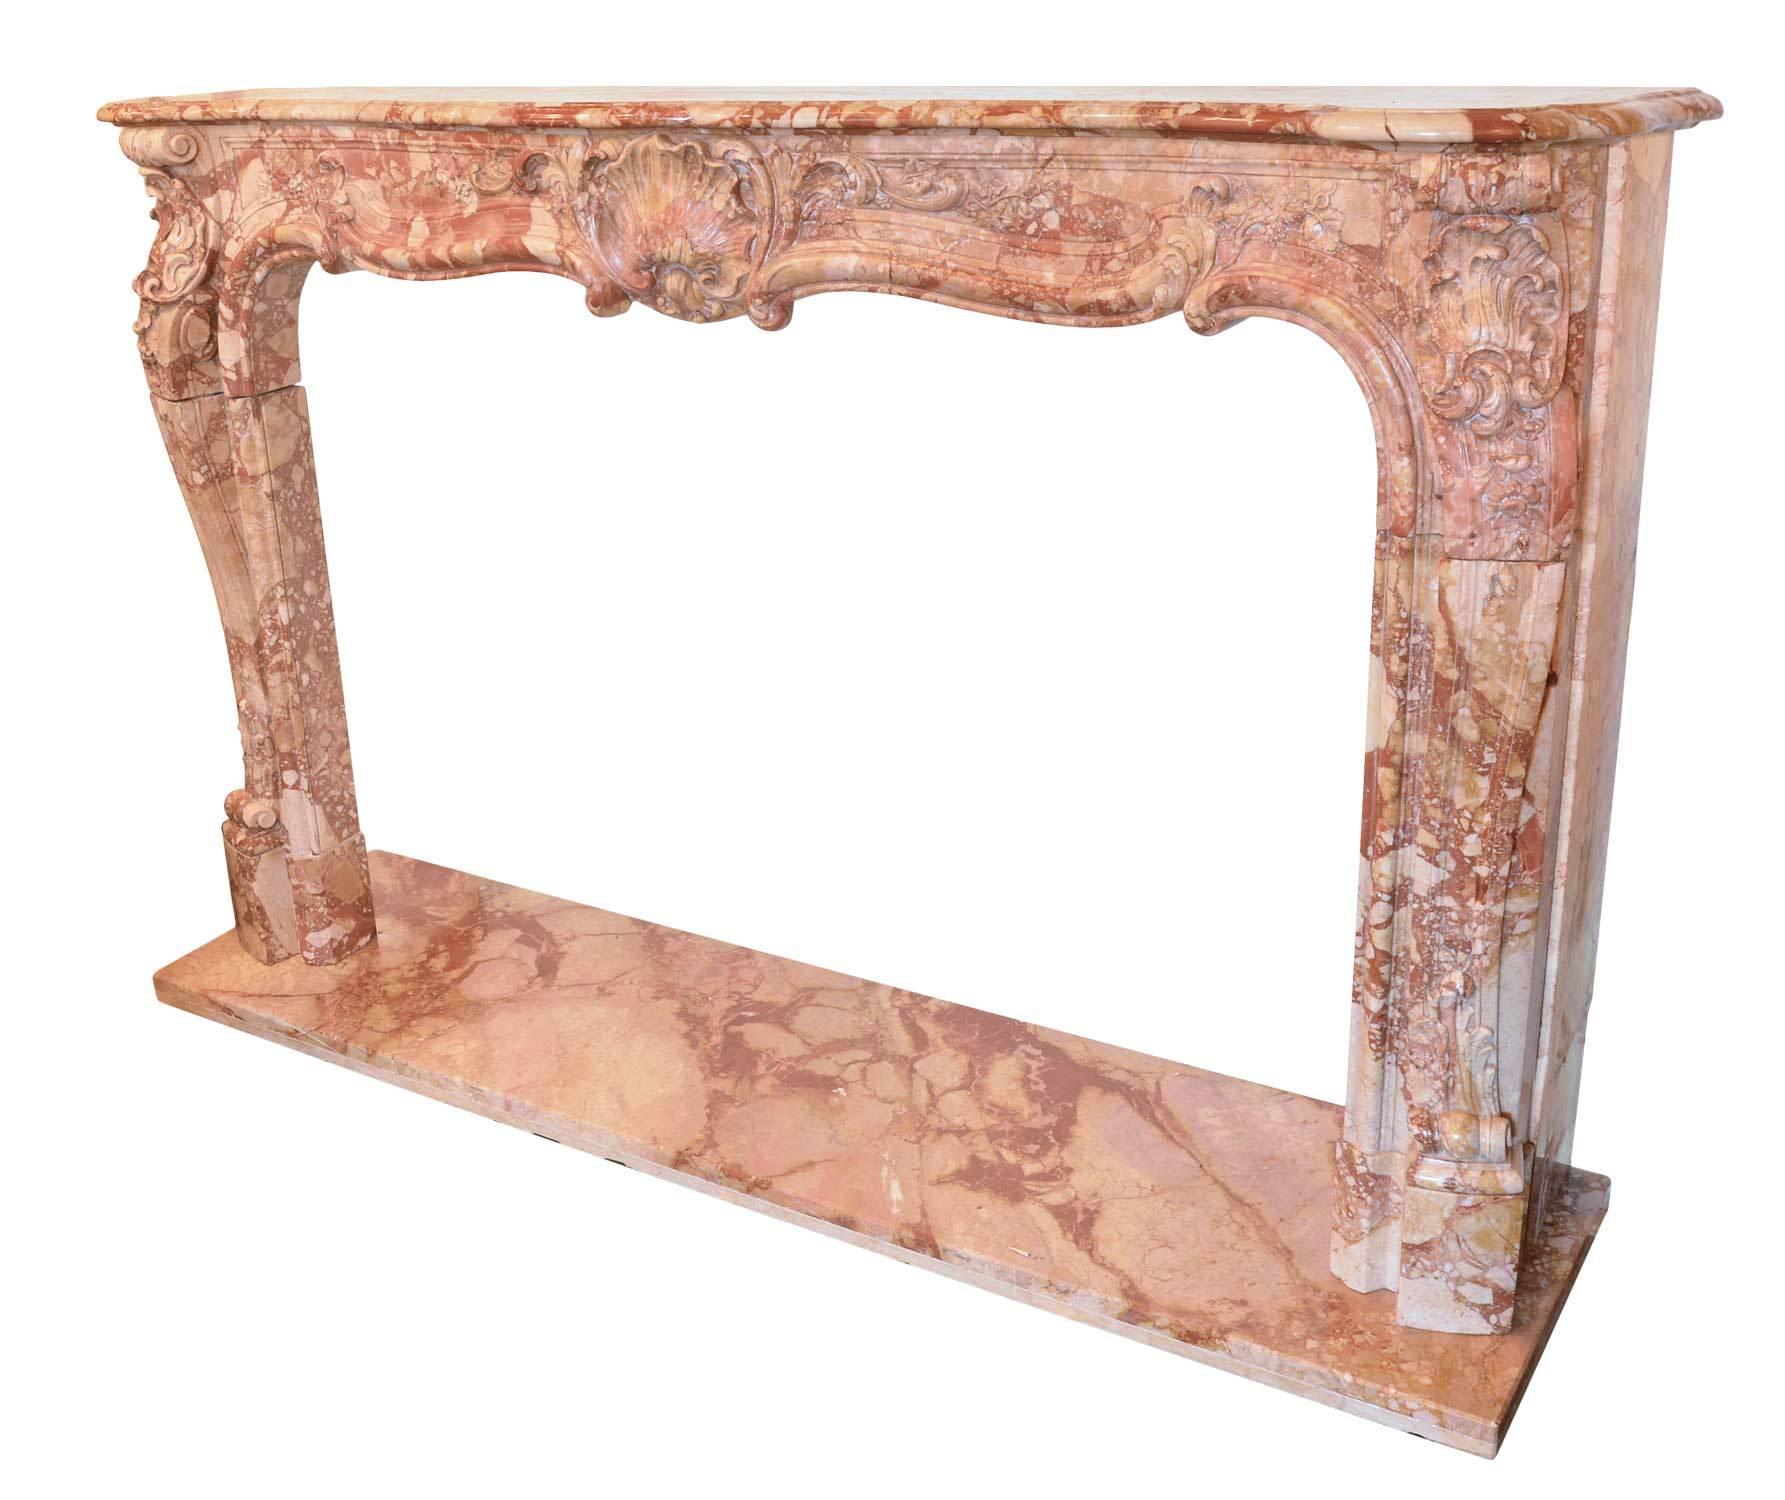 This mantel is made of red marble and features a shell keystone with decorative leafy details across the front and legs. Original hearth included.